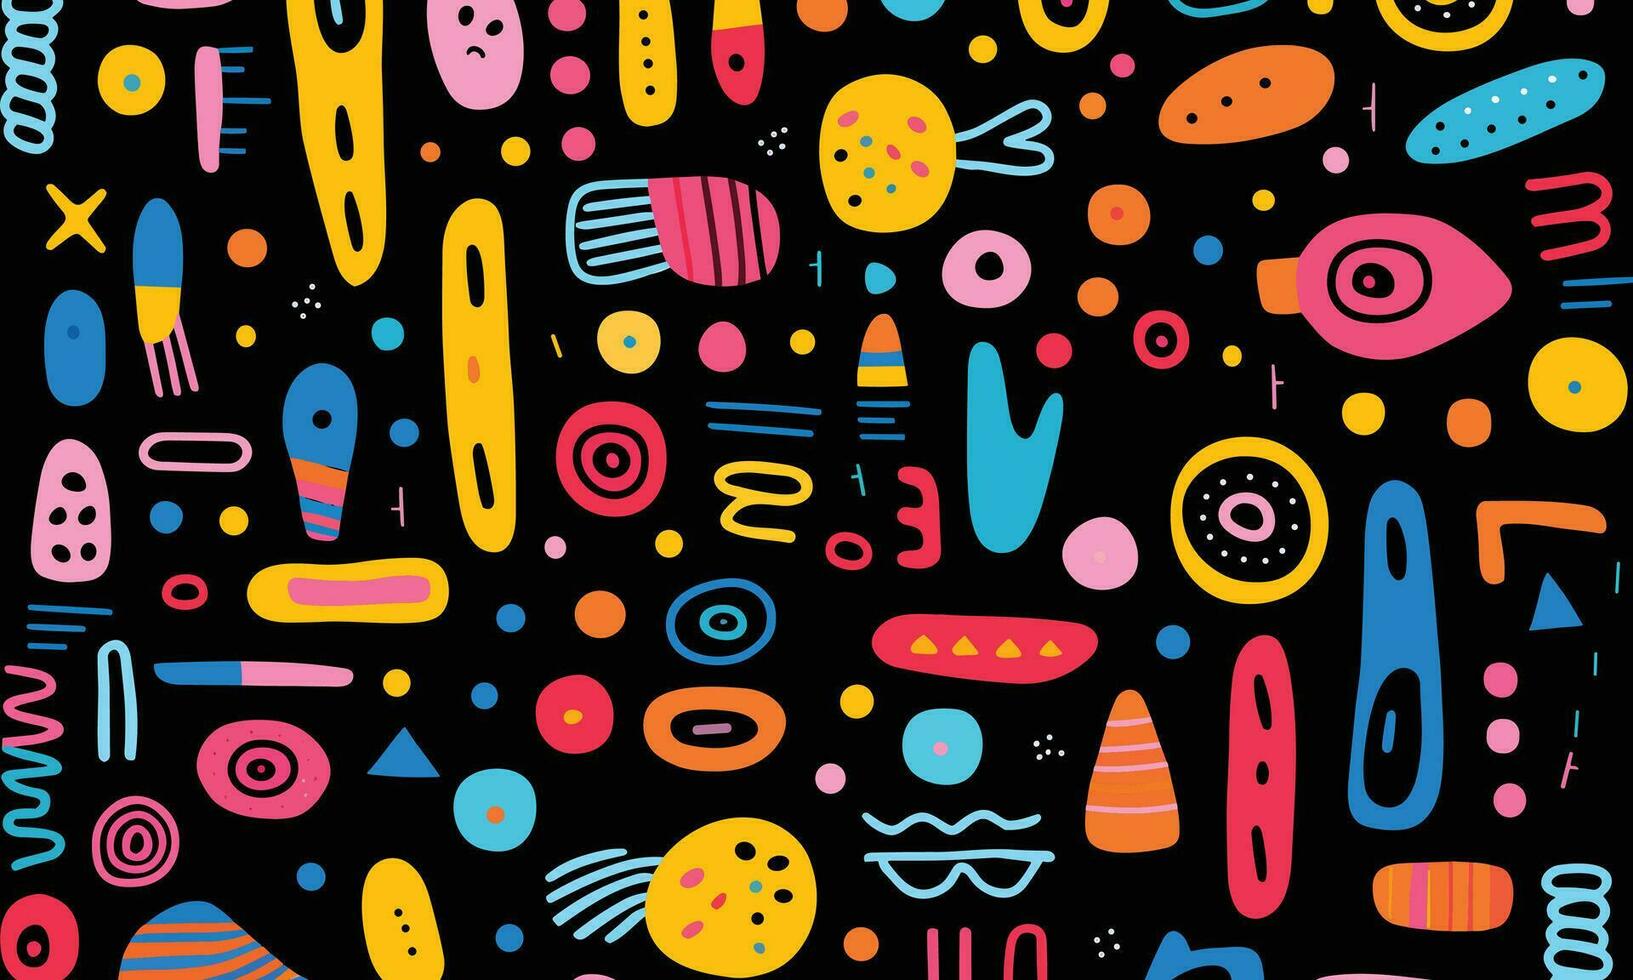 colorful abstract pattern of different shapes and colors on a black background, in the style of simple line drawings, minimalist brush work, east village art, whimsical doodles, bold color blocks vector